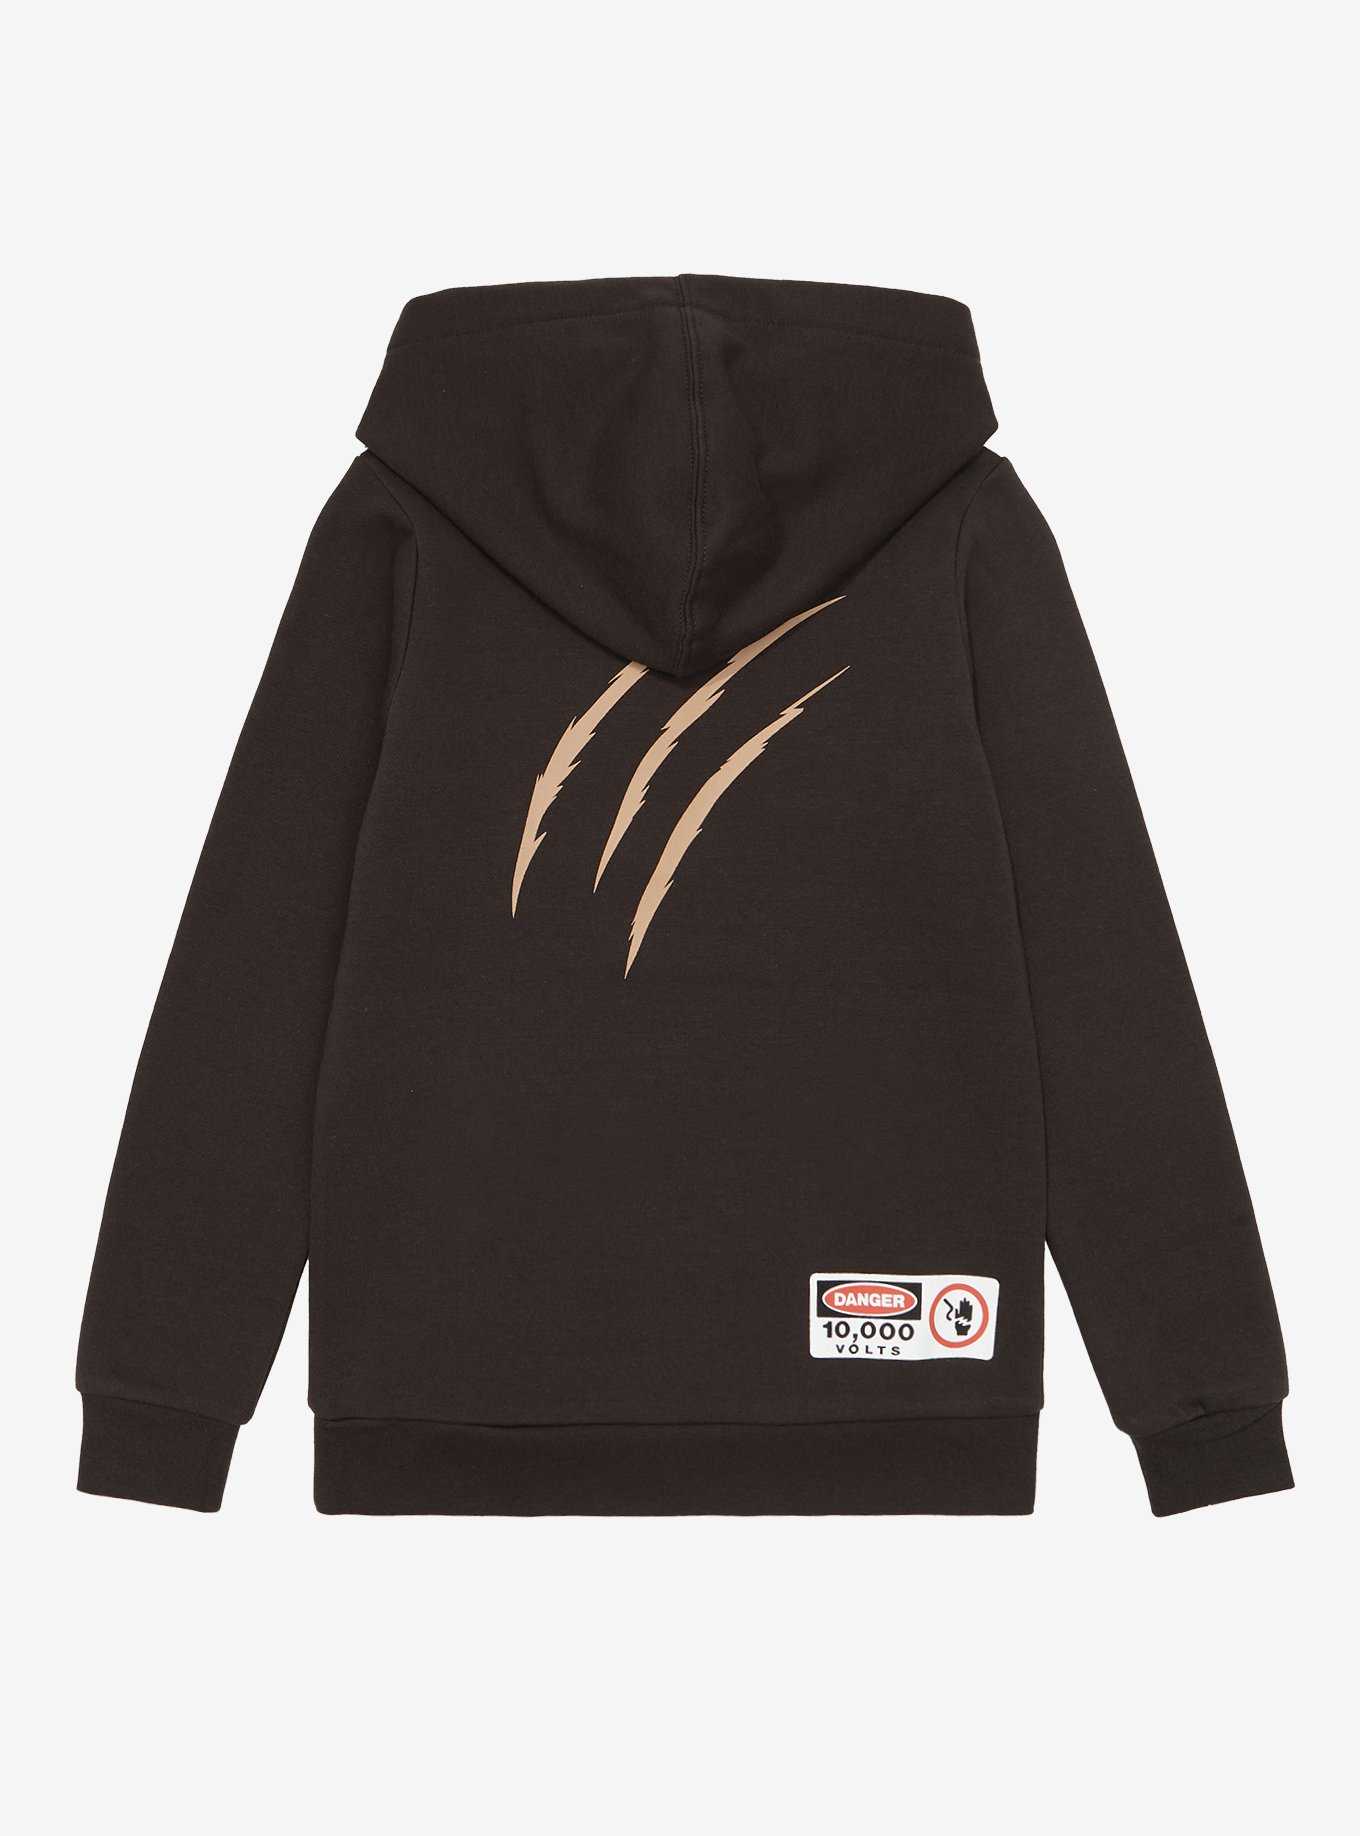 Jurassic Park Logo Youth Hoodie - BoxLunch Exclusive, , hi-res